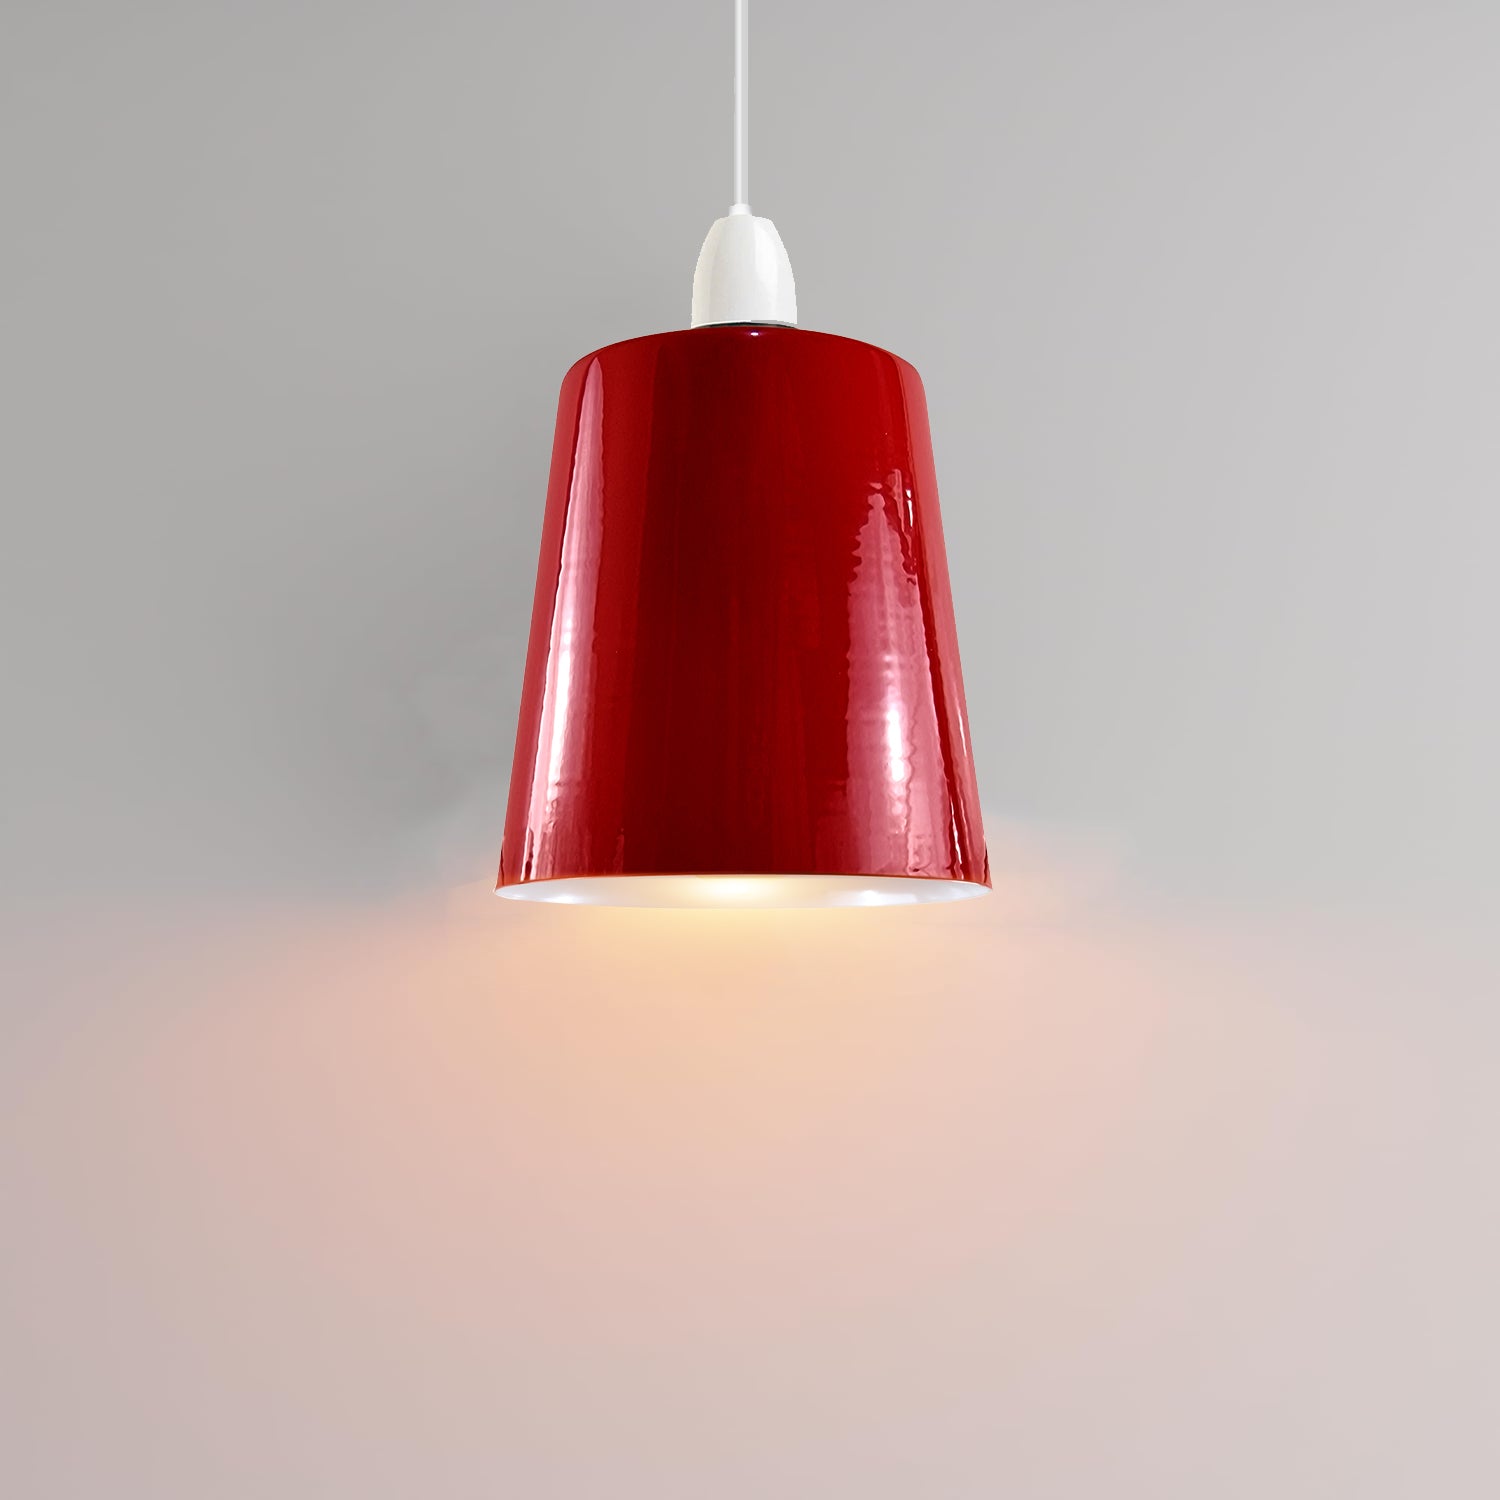 Retro Easy Fit Light Shade 13cm Metal E27 Red Lampshade~3899